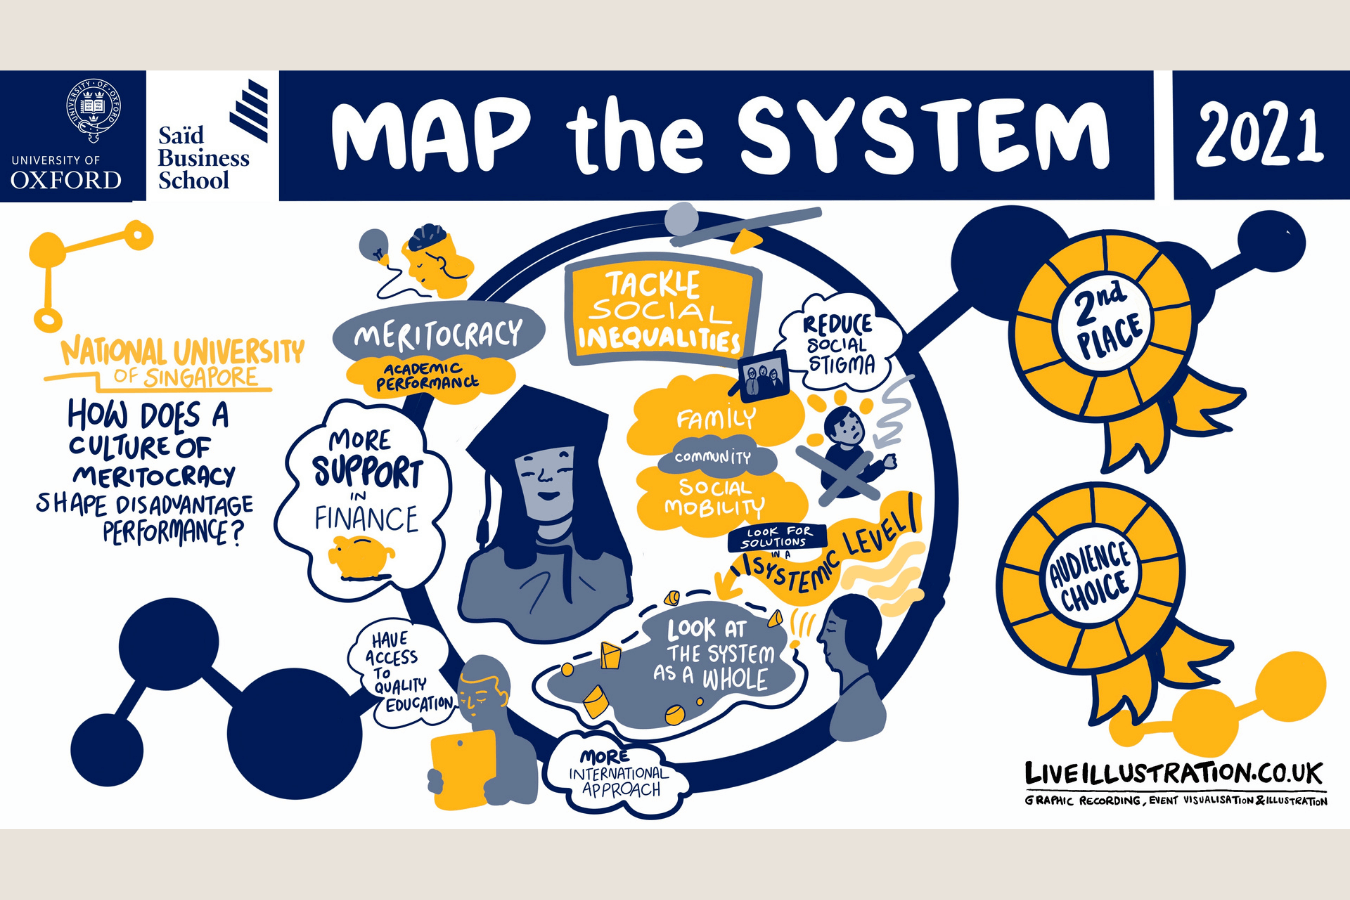 Map the System 2021 finalist's Live Scribed Illustrations from National University of Singapore